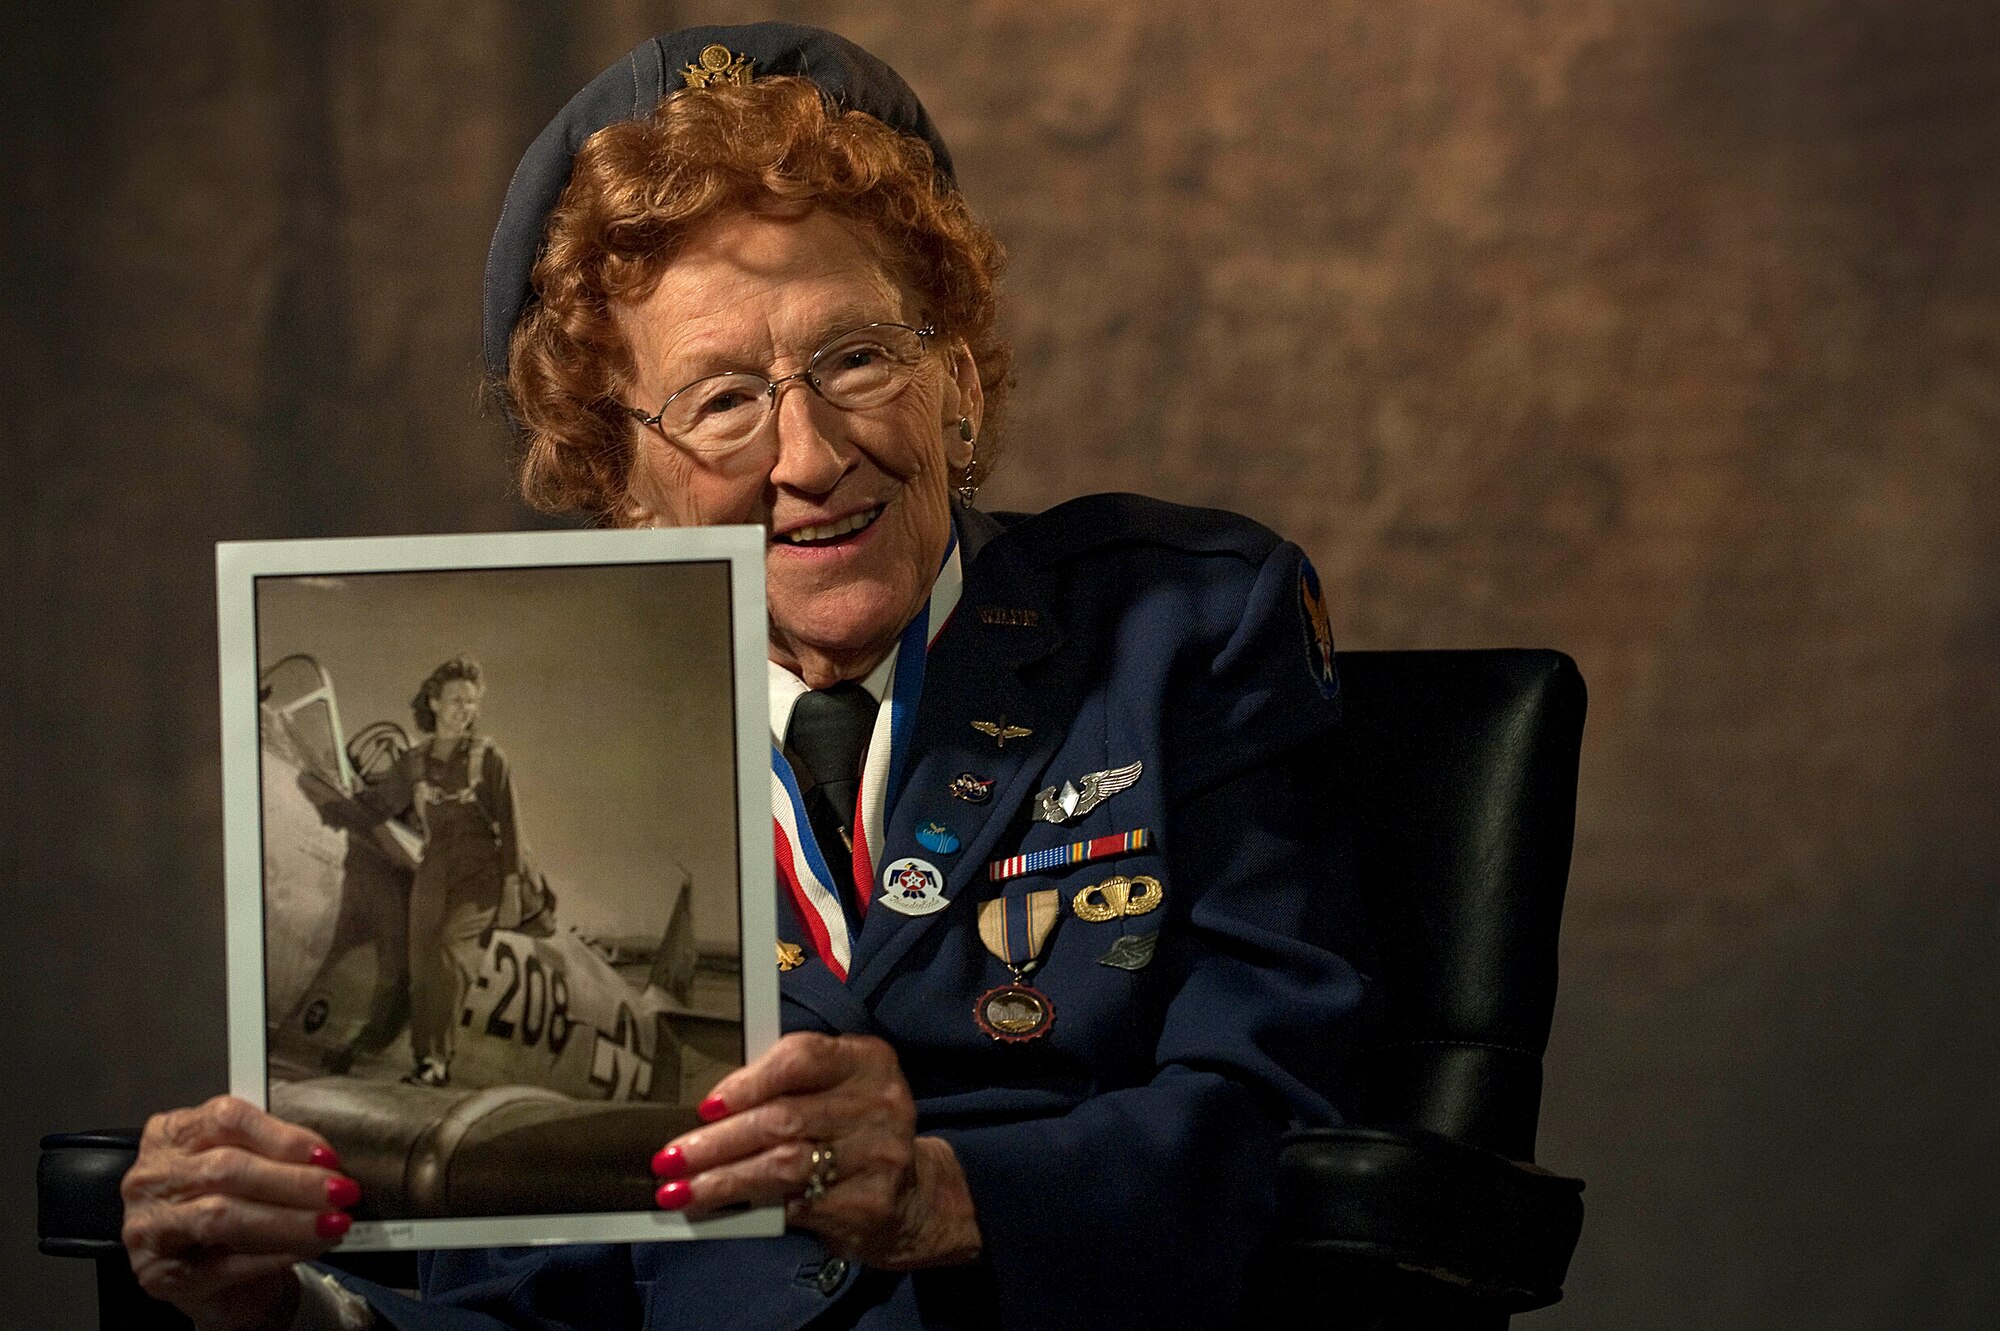 Betty Wall Strohfus, a WWII Women Airforce Service Pilot, holds a picture of herself when she was a WASP pilot, Sept. 27,2012, at Nellis Air Force Base, Nev. Strohfus was stationed at Las Vegas Army Air Field from 1943-44, and was one of 1,074 women who became certified WASP pilots during WWII. Las Vegas Army Air Field later was re-designated as Nellis AFB. The female pilots of the WASP freed up male pilots for combat services and duties during the WWII era. (U.S. Air Force photo by Staff Sgt. Christopher Hubenthal)